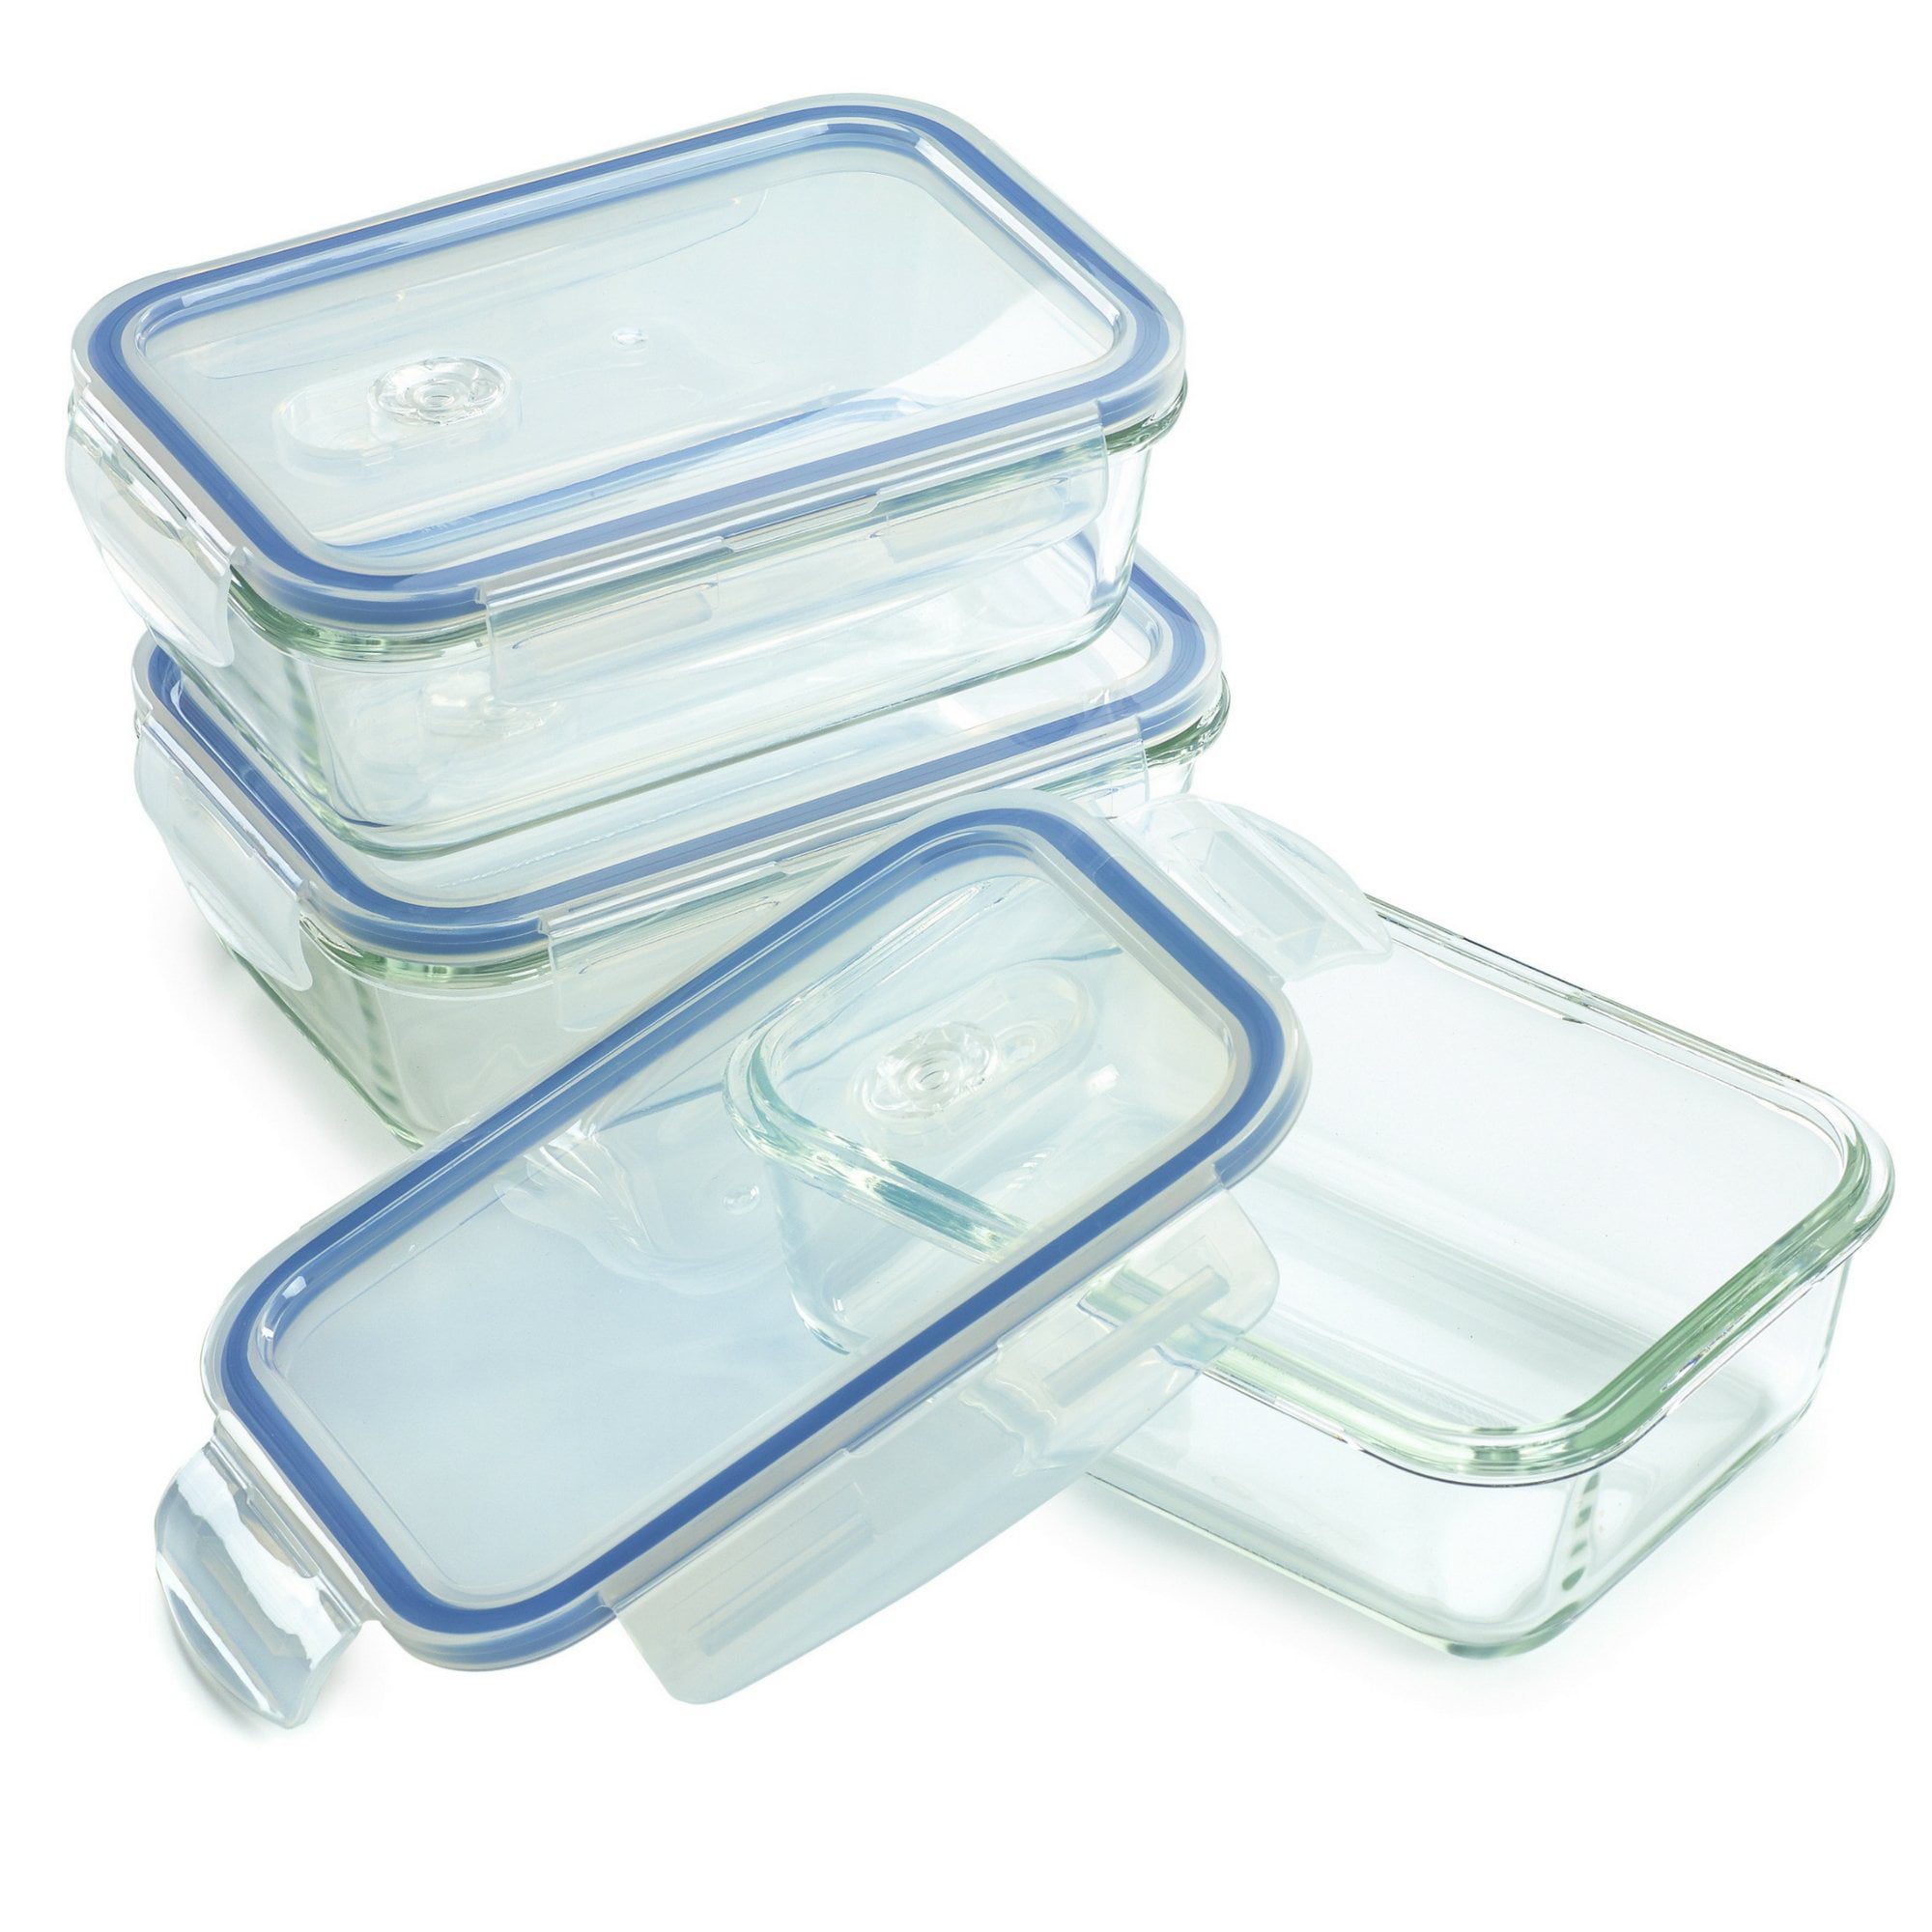 FineDine Glass Meal Prep Containers with Lids - Set of 3 Square 28 Oz  Containers - Airtight, Leakproof, Microwave & Dishwasher Safe - Perfect for